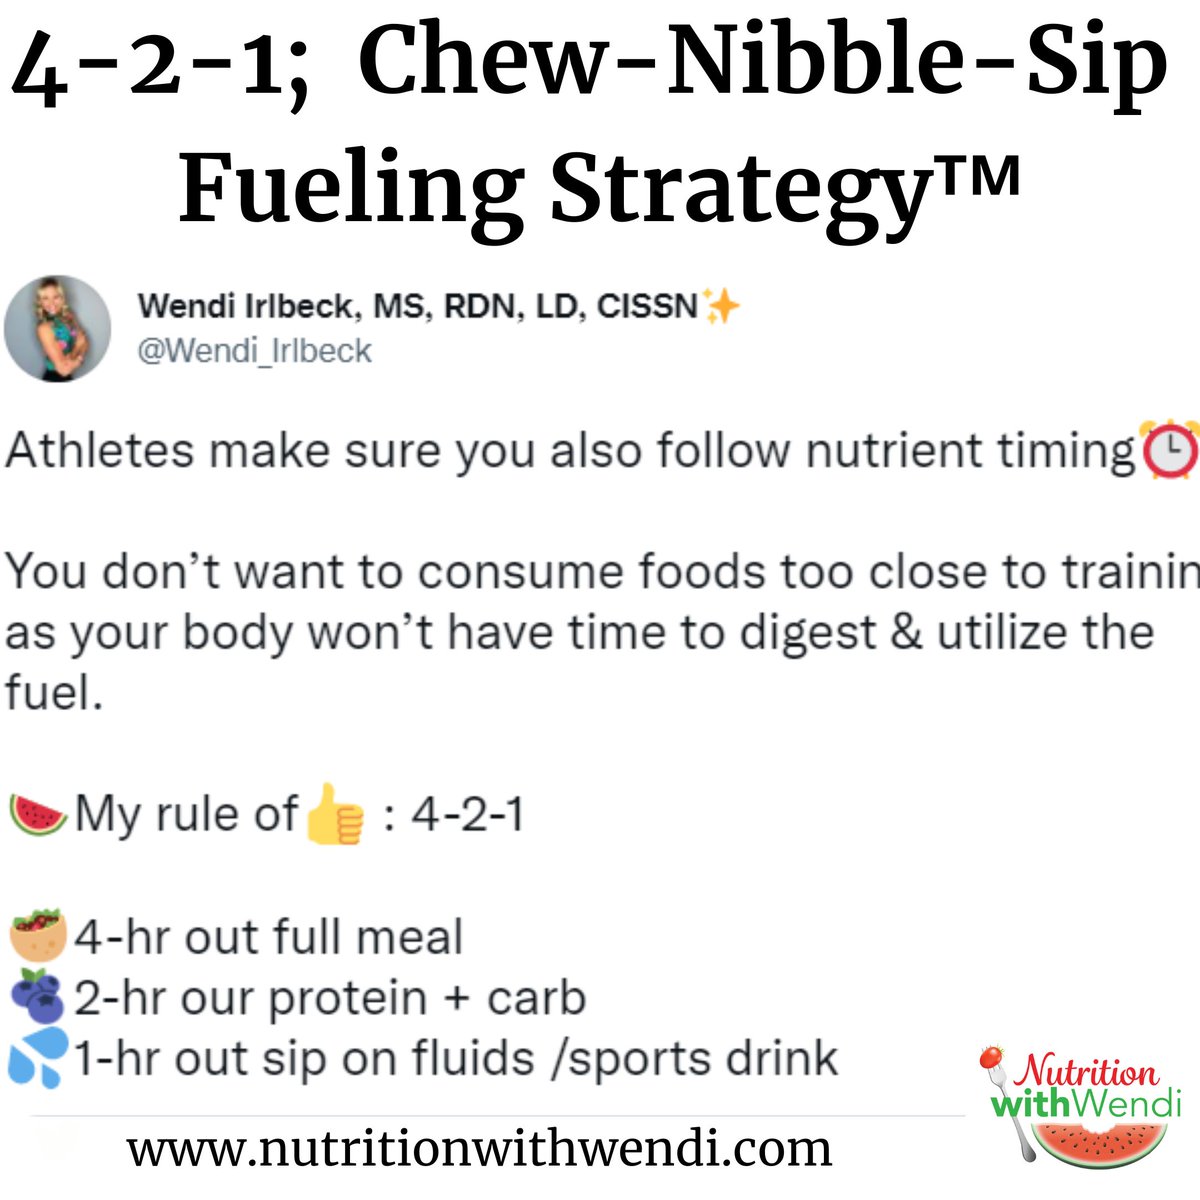 'Wendi, what should we be eating leading up to the competition? What portions? What about timing?' I get asked this daily! So years ago I developed the fueling strategy that has helped MANY effectively fuel performance without confusion. '4-2-1; Chew-Nibble-Sip Strategyᵀᴹ